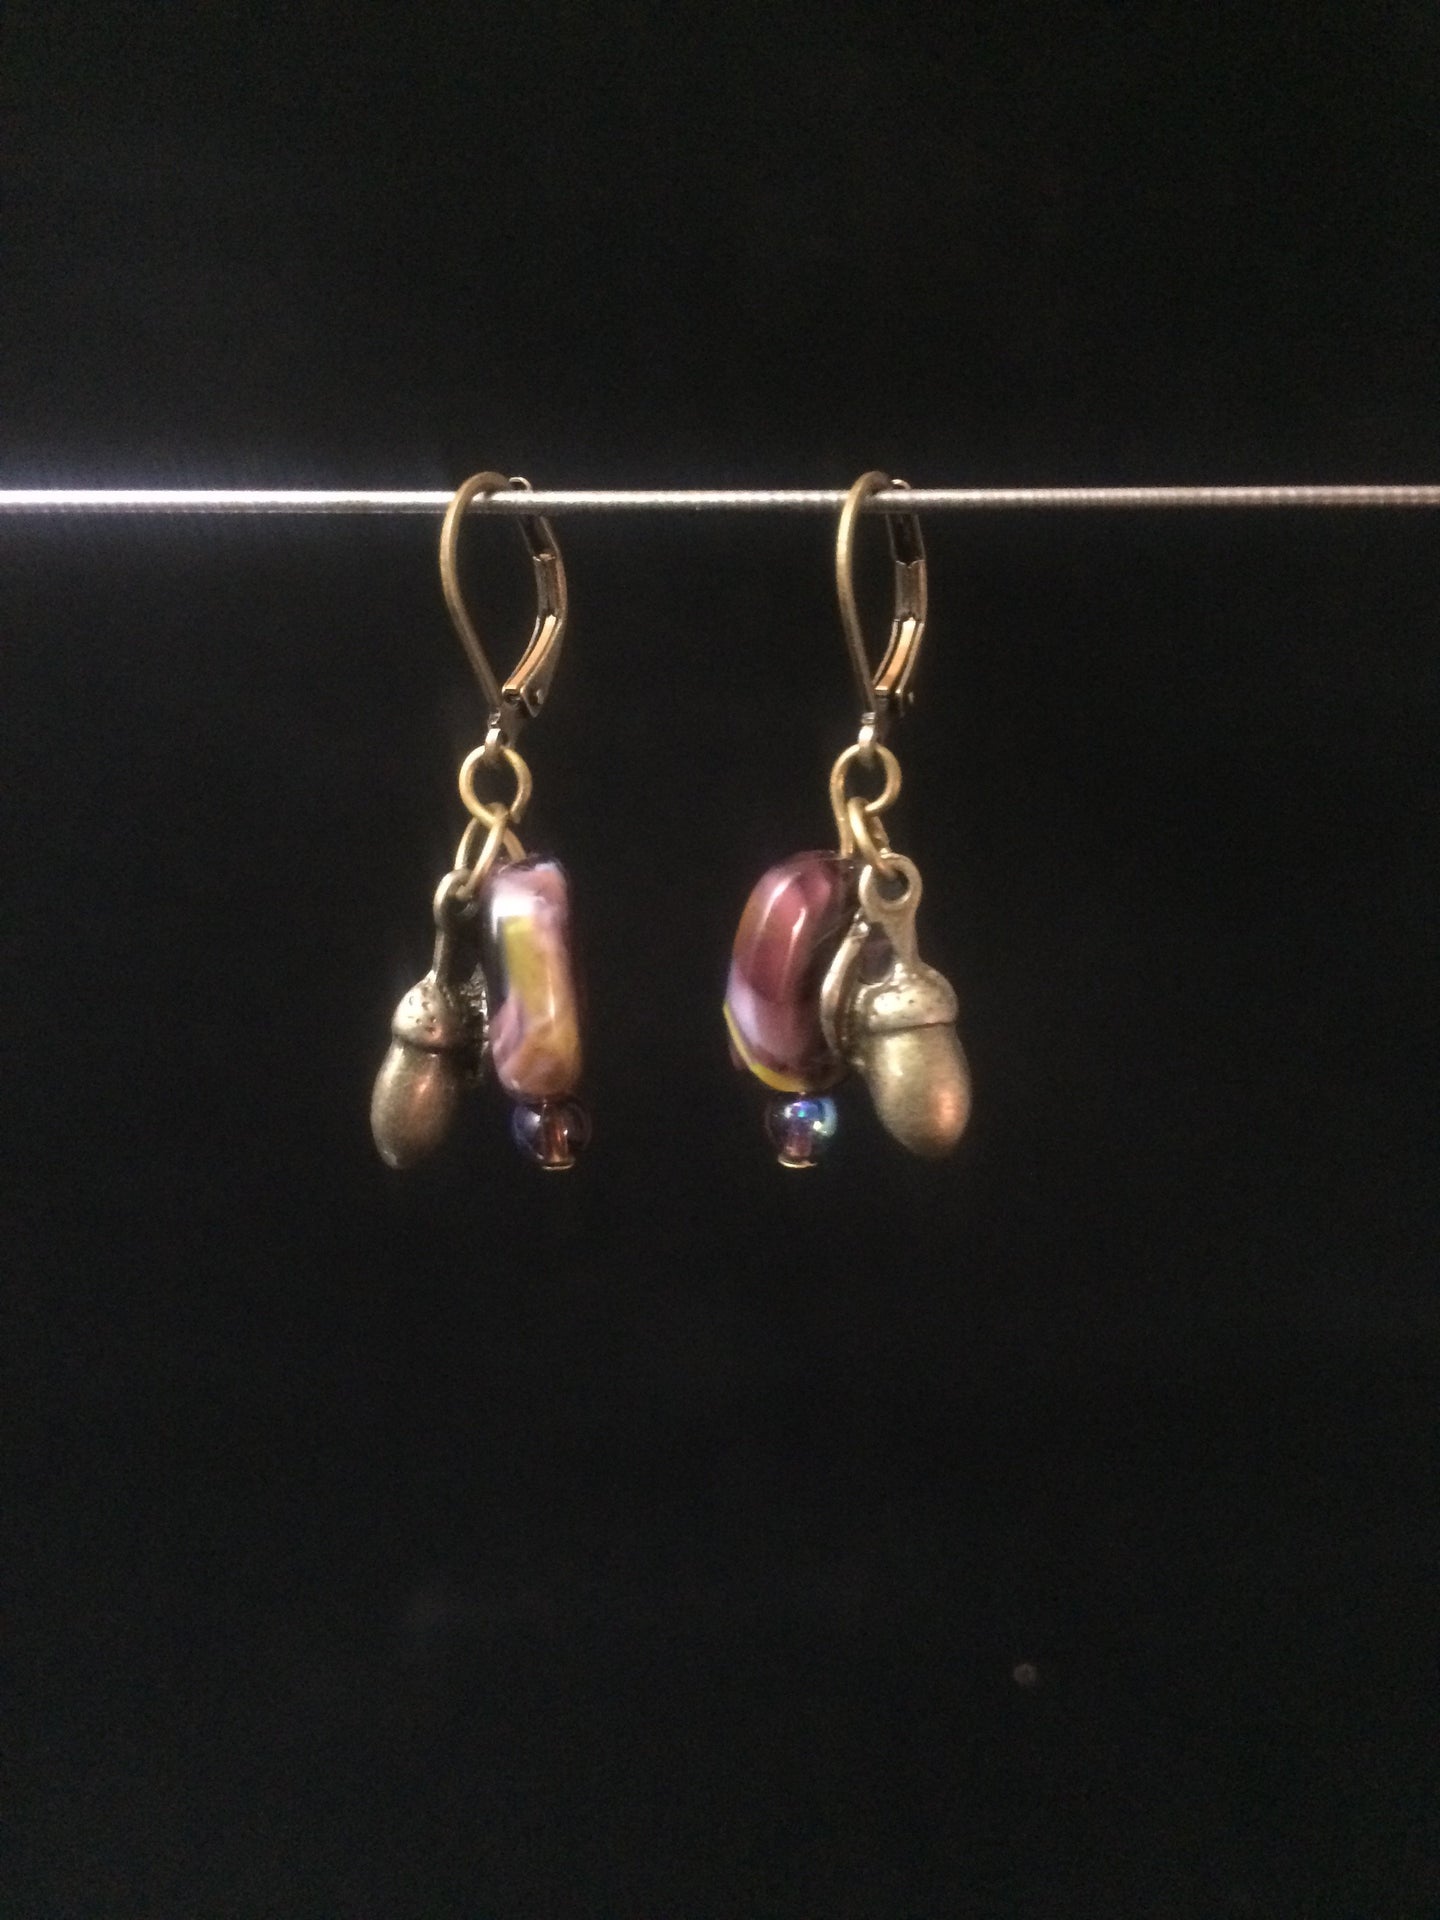 Leverback Earrings made from purple blown glass beads that have swirls and metal acorn charms.åÊ Round glass pearls are added for accent.